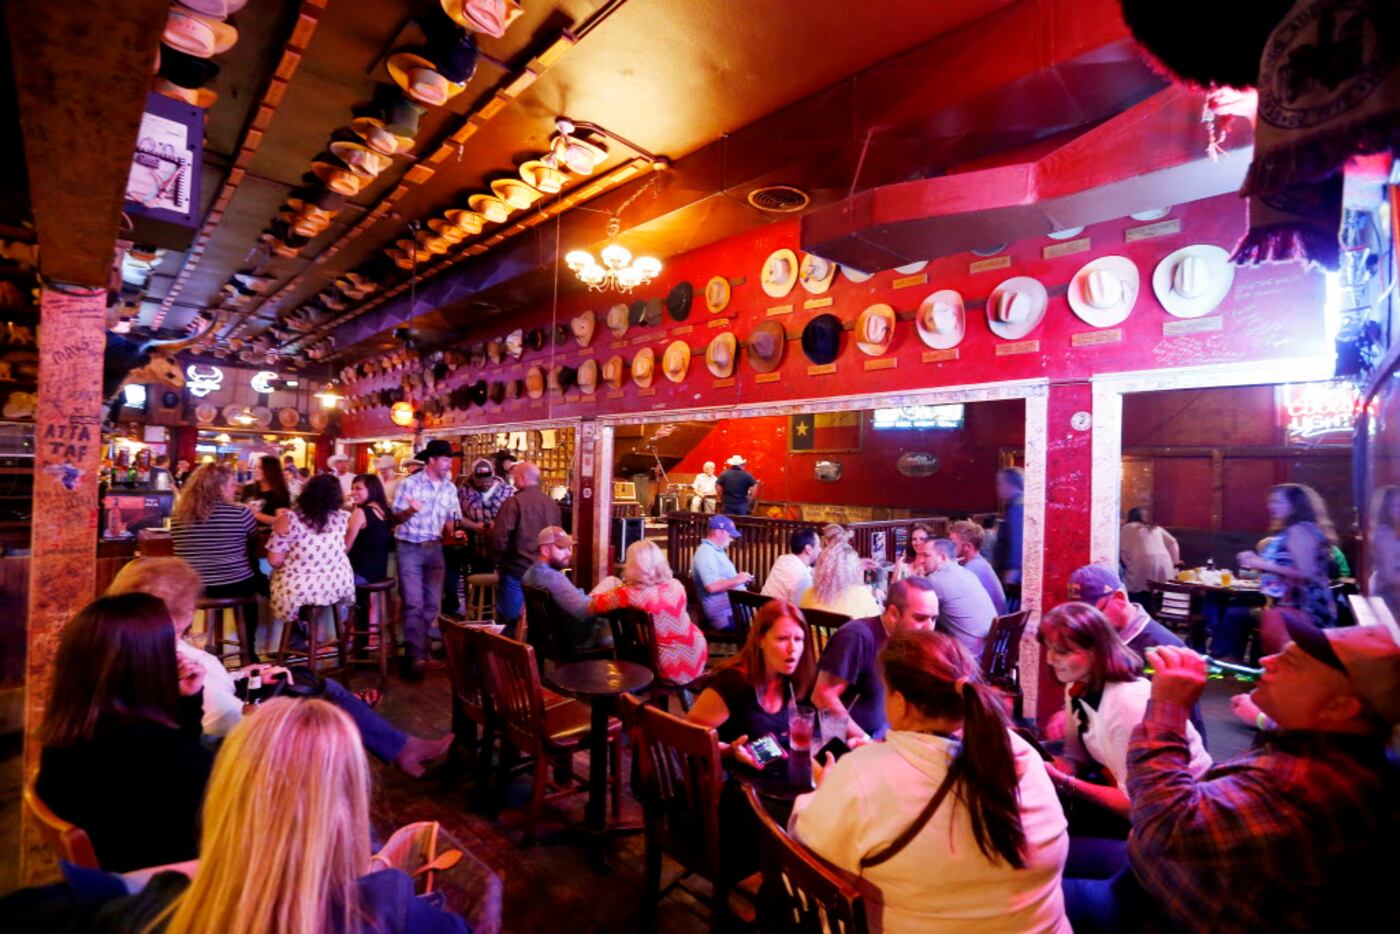 At the White Elephant Saloon in the Fort Worth Stockyards, the walls are covered with music...